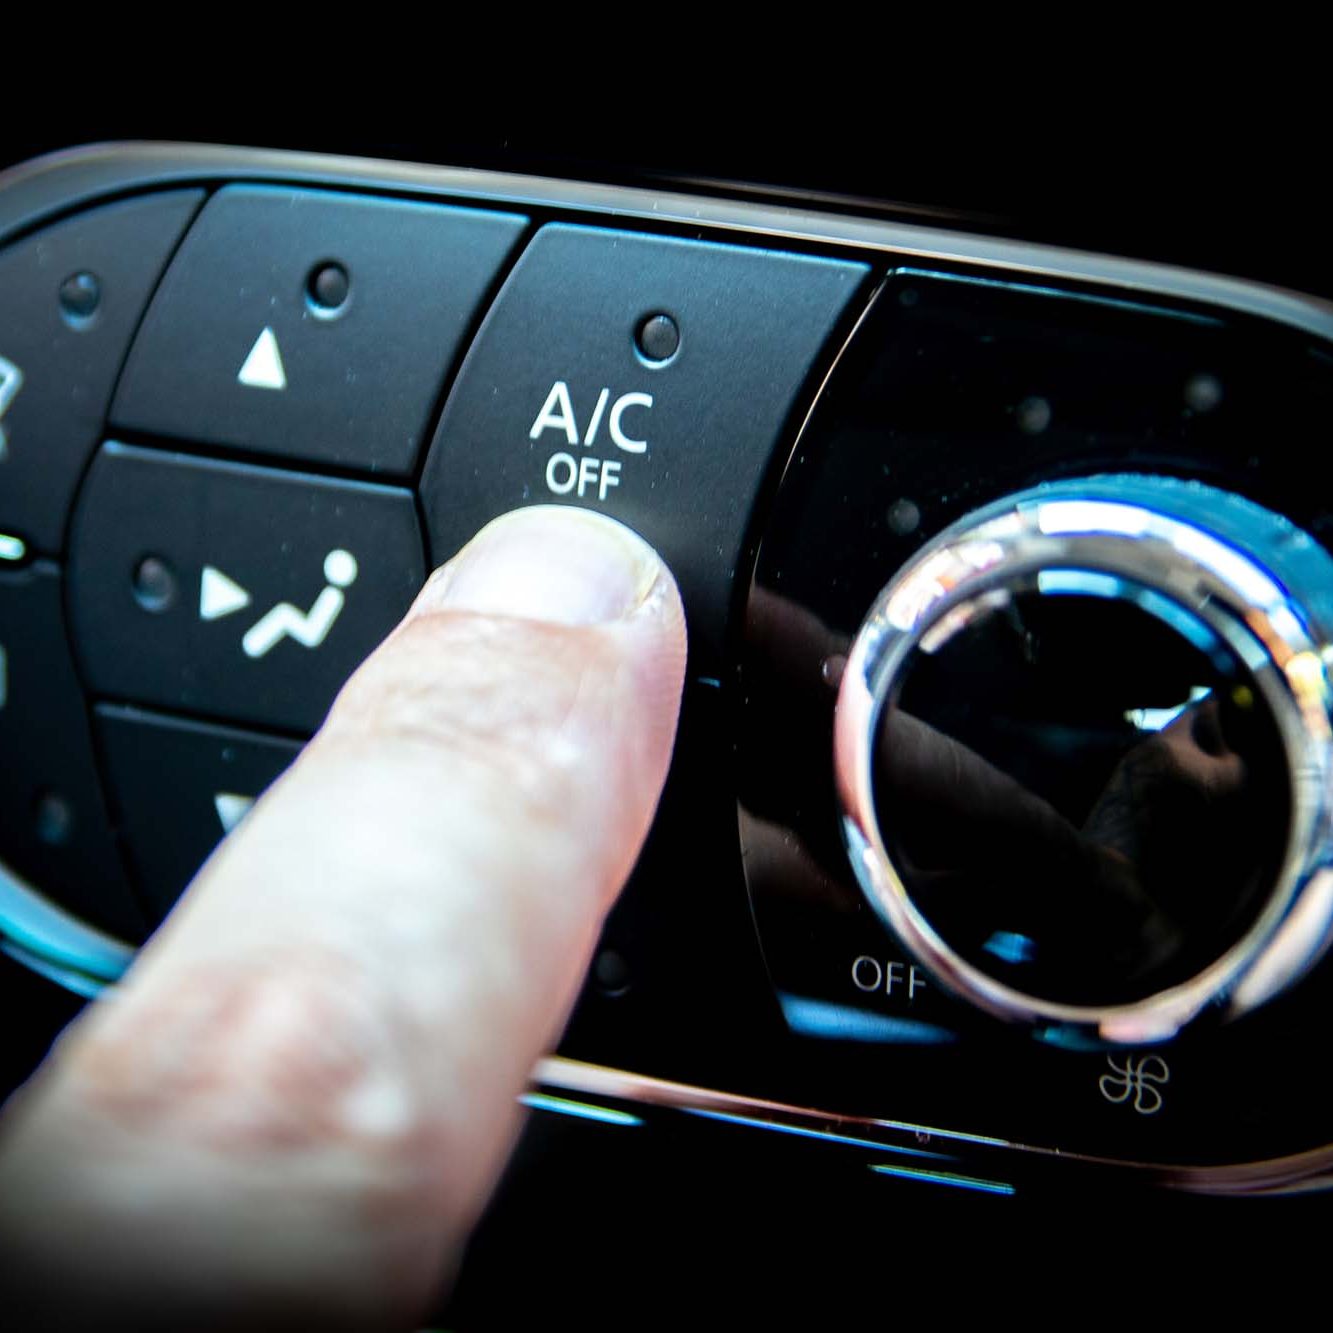 A finger pressing the A/C or air conditioning button on the dashboard of a car